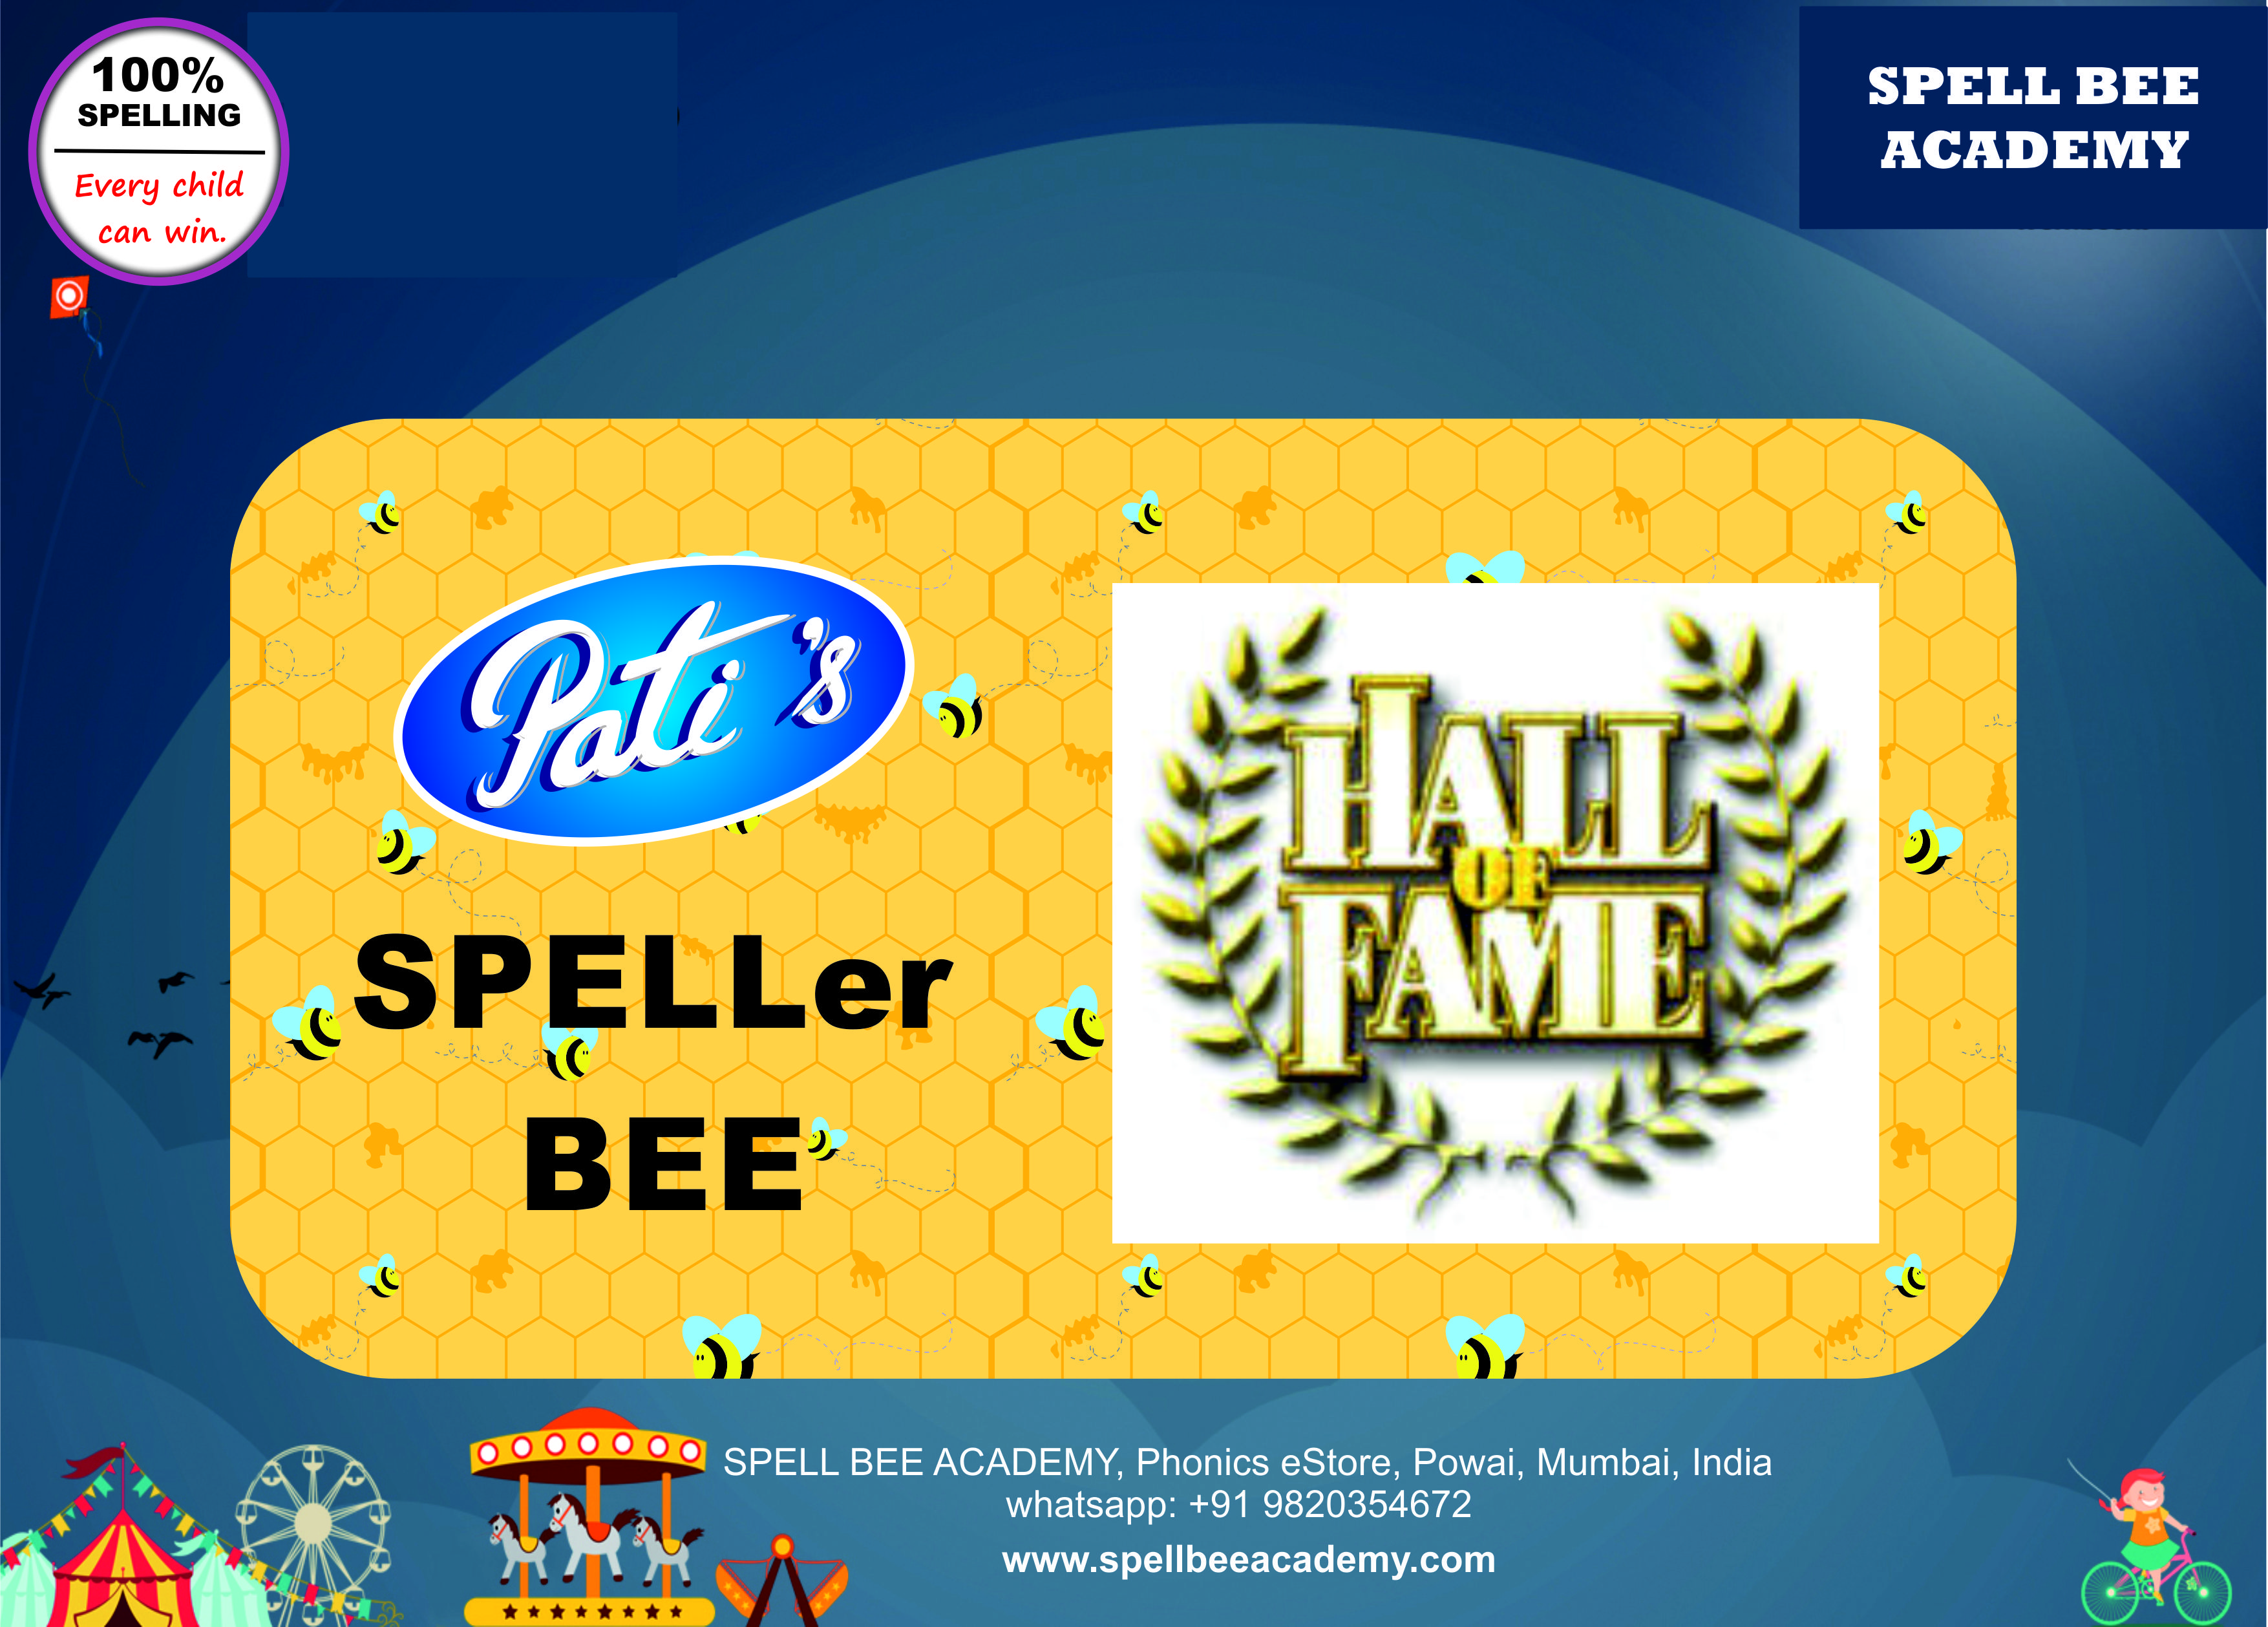 spelling spell bee competition exam 2021 2022